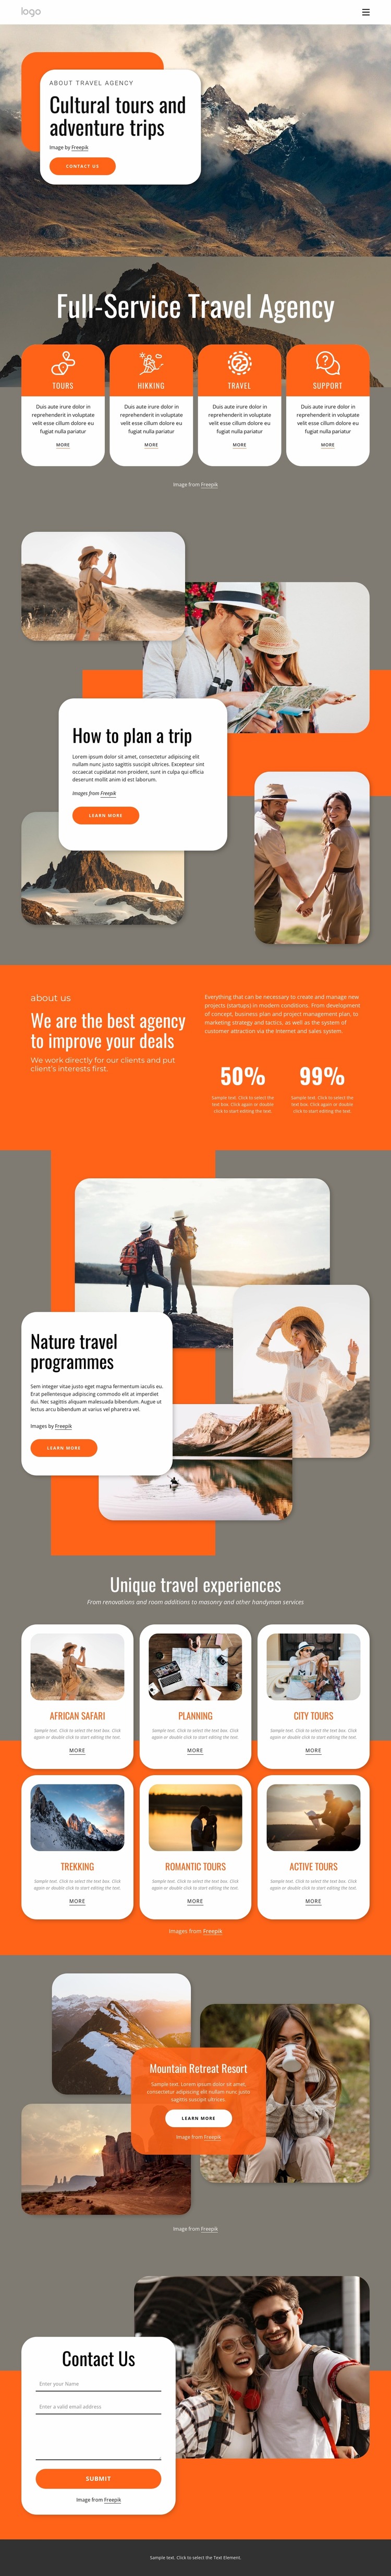 Group travel for all ages Html Website Builder